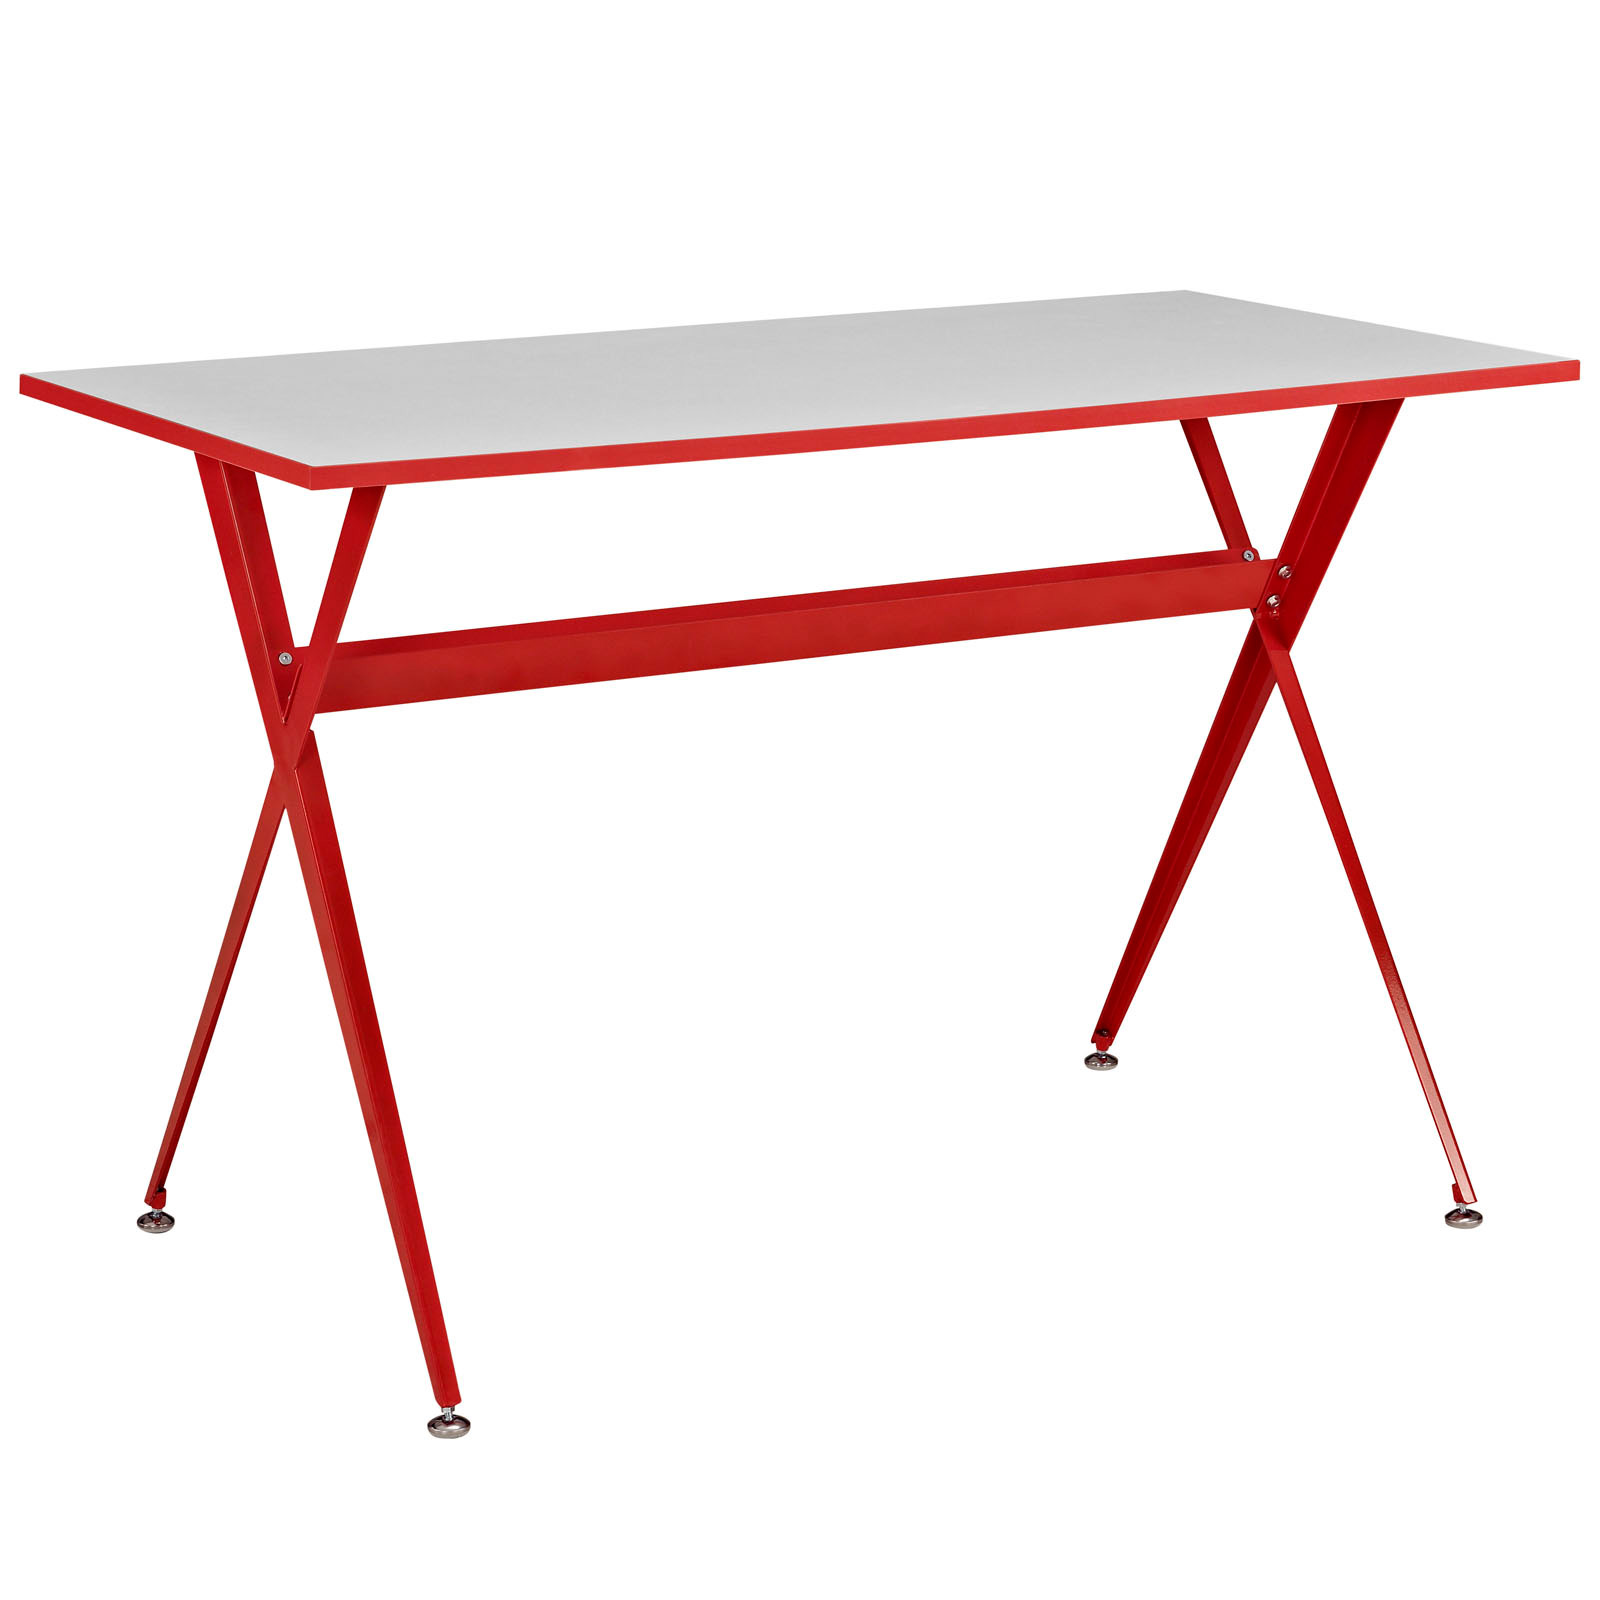 Space saving desk from Modway - Shown in Red